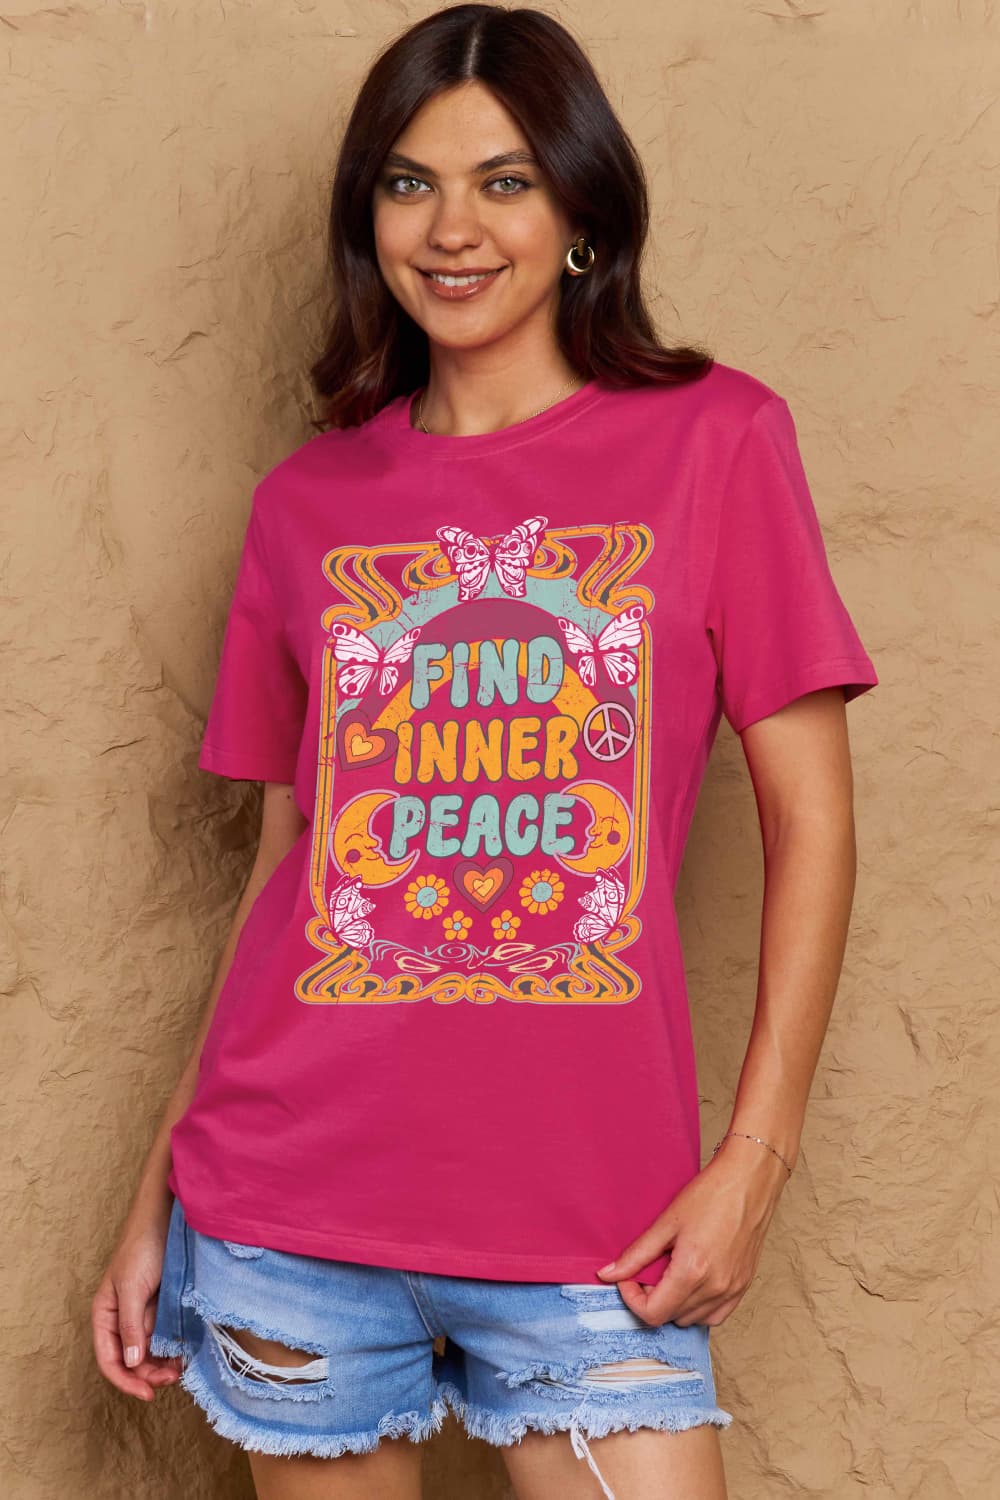 Simply Love Full Size FIND INNER PEACE Graphic Cotton T-Shirt